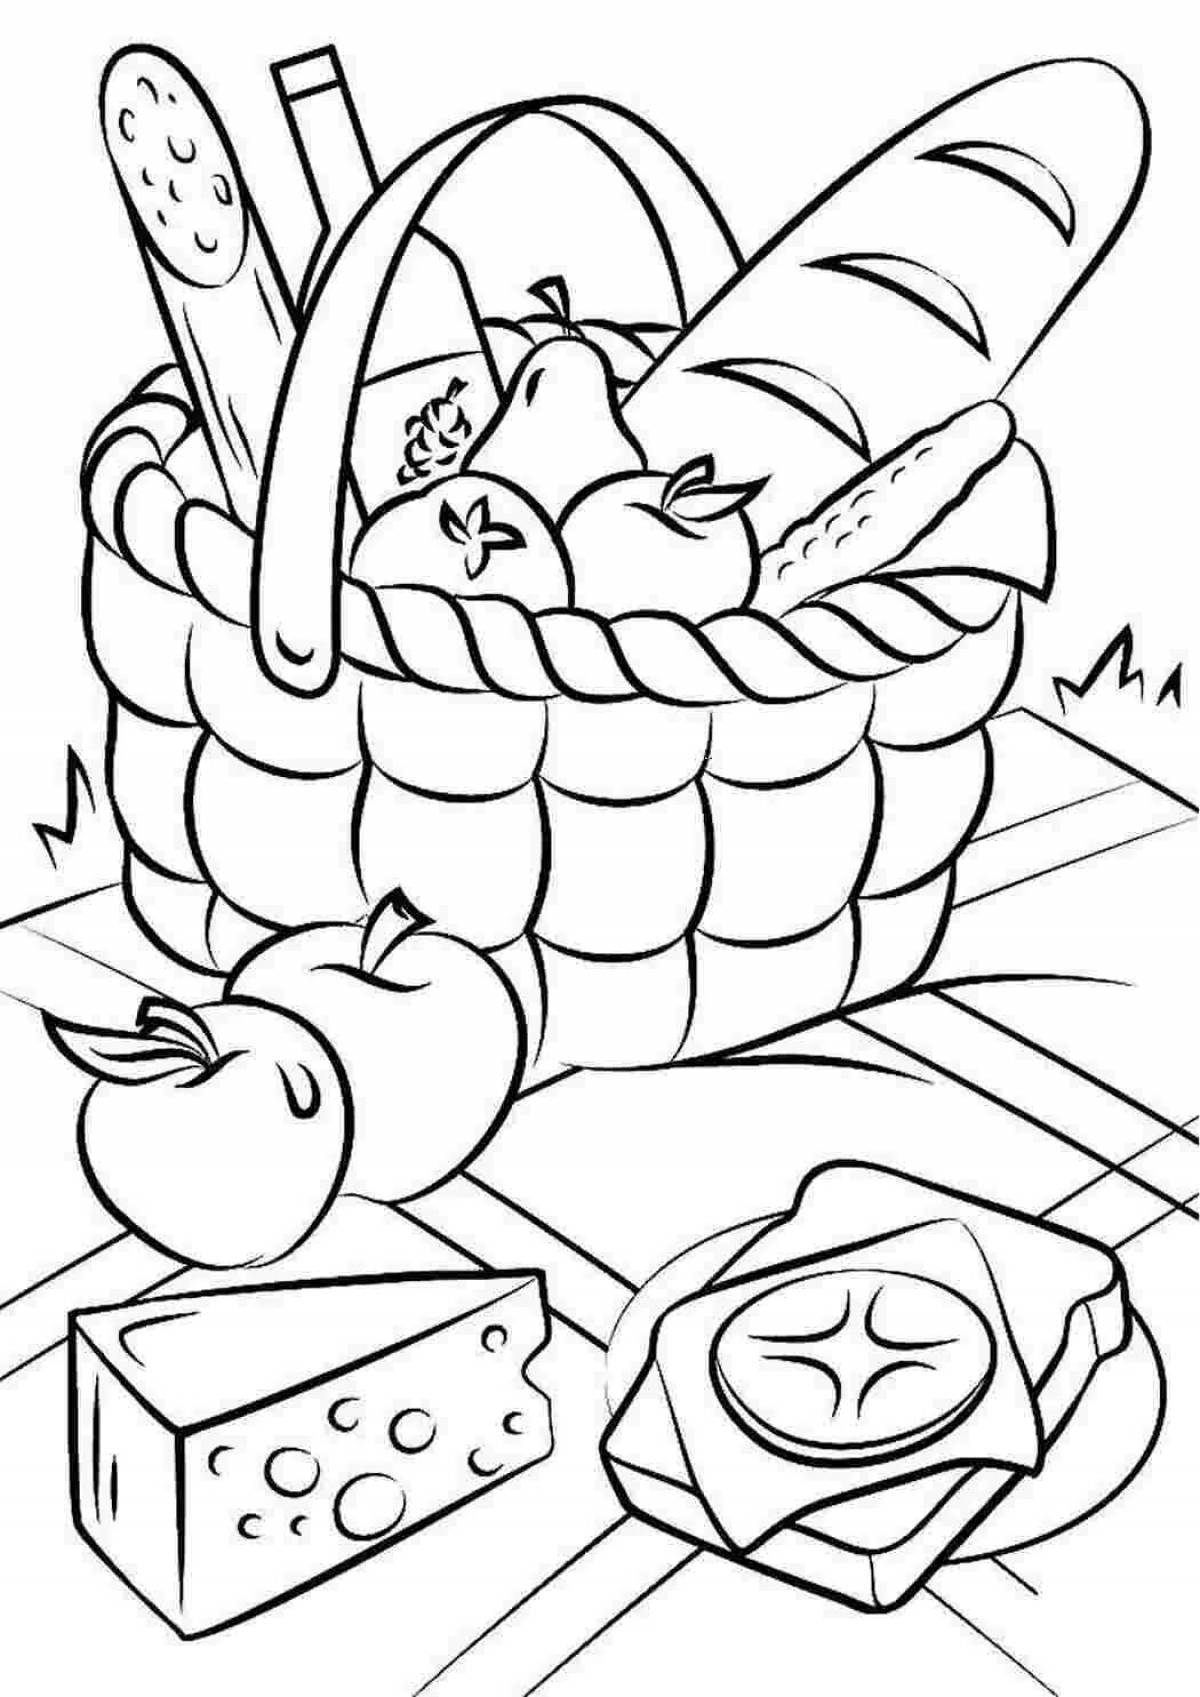 Picnic basket with food #19